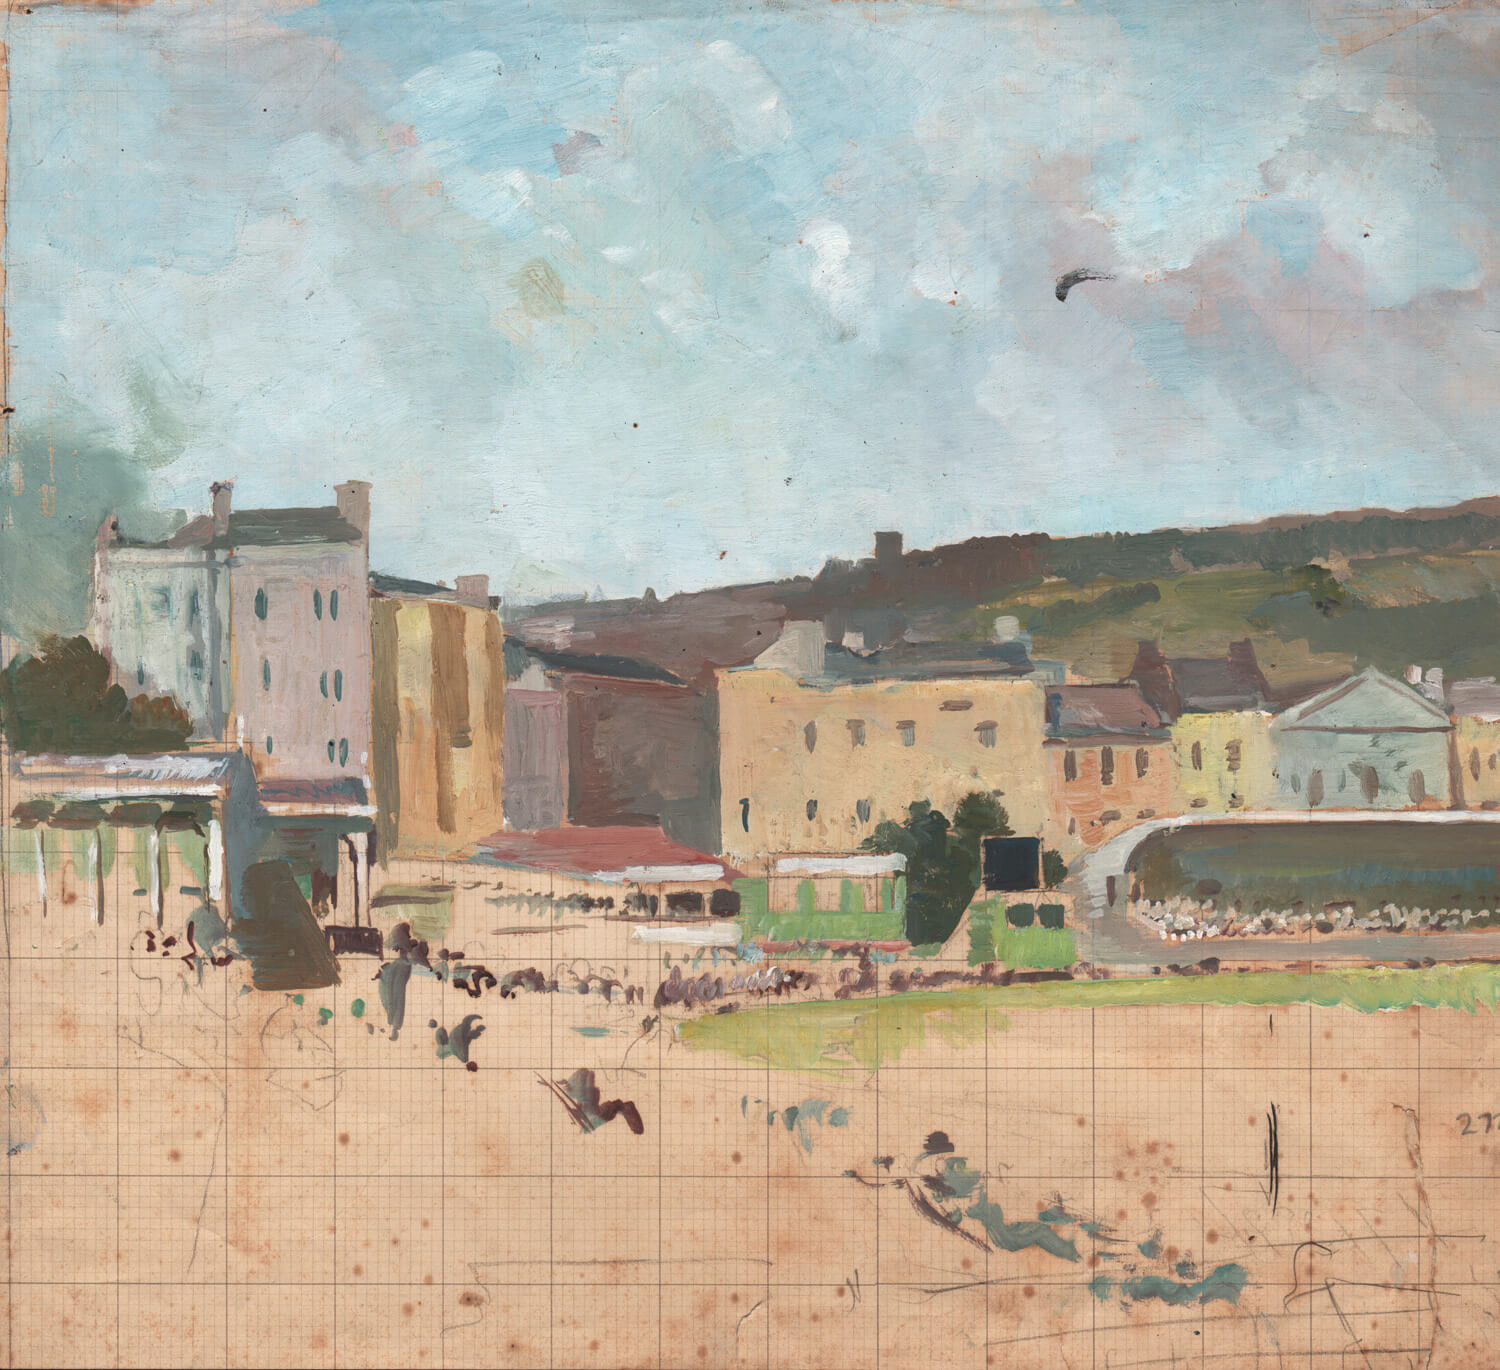 Charles Cundall - Study for the Central Cricket & Recreation Ground